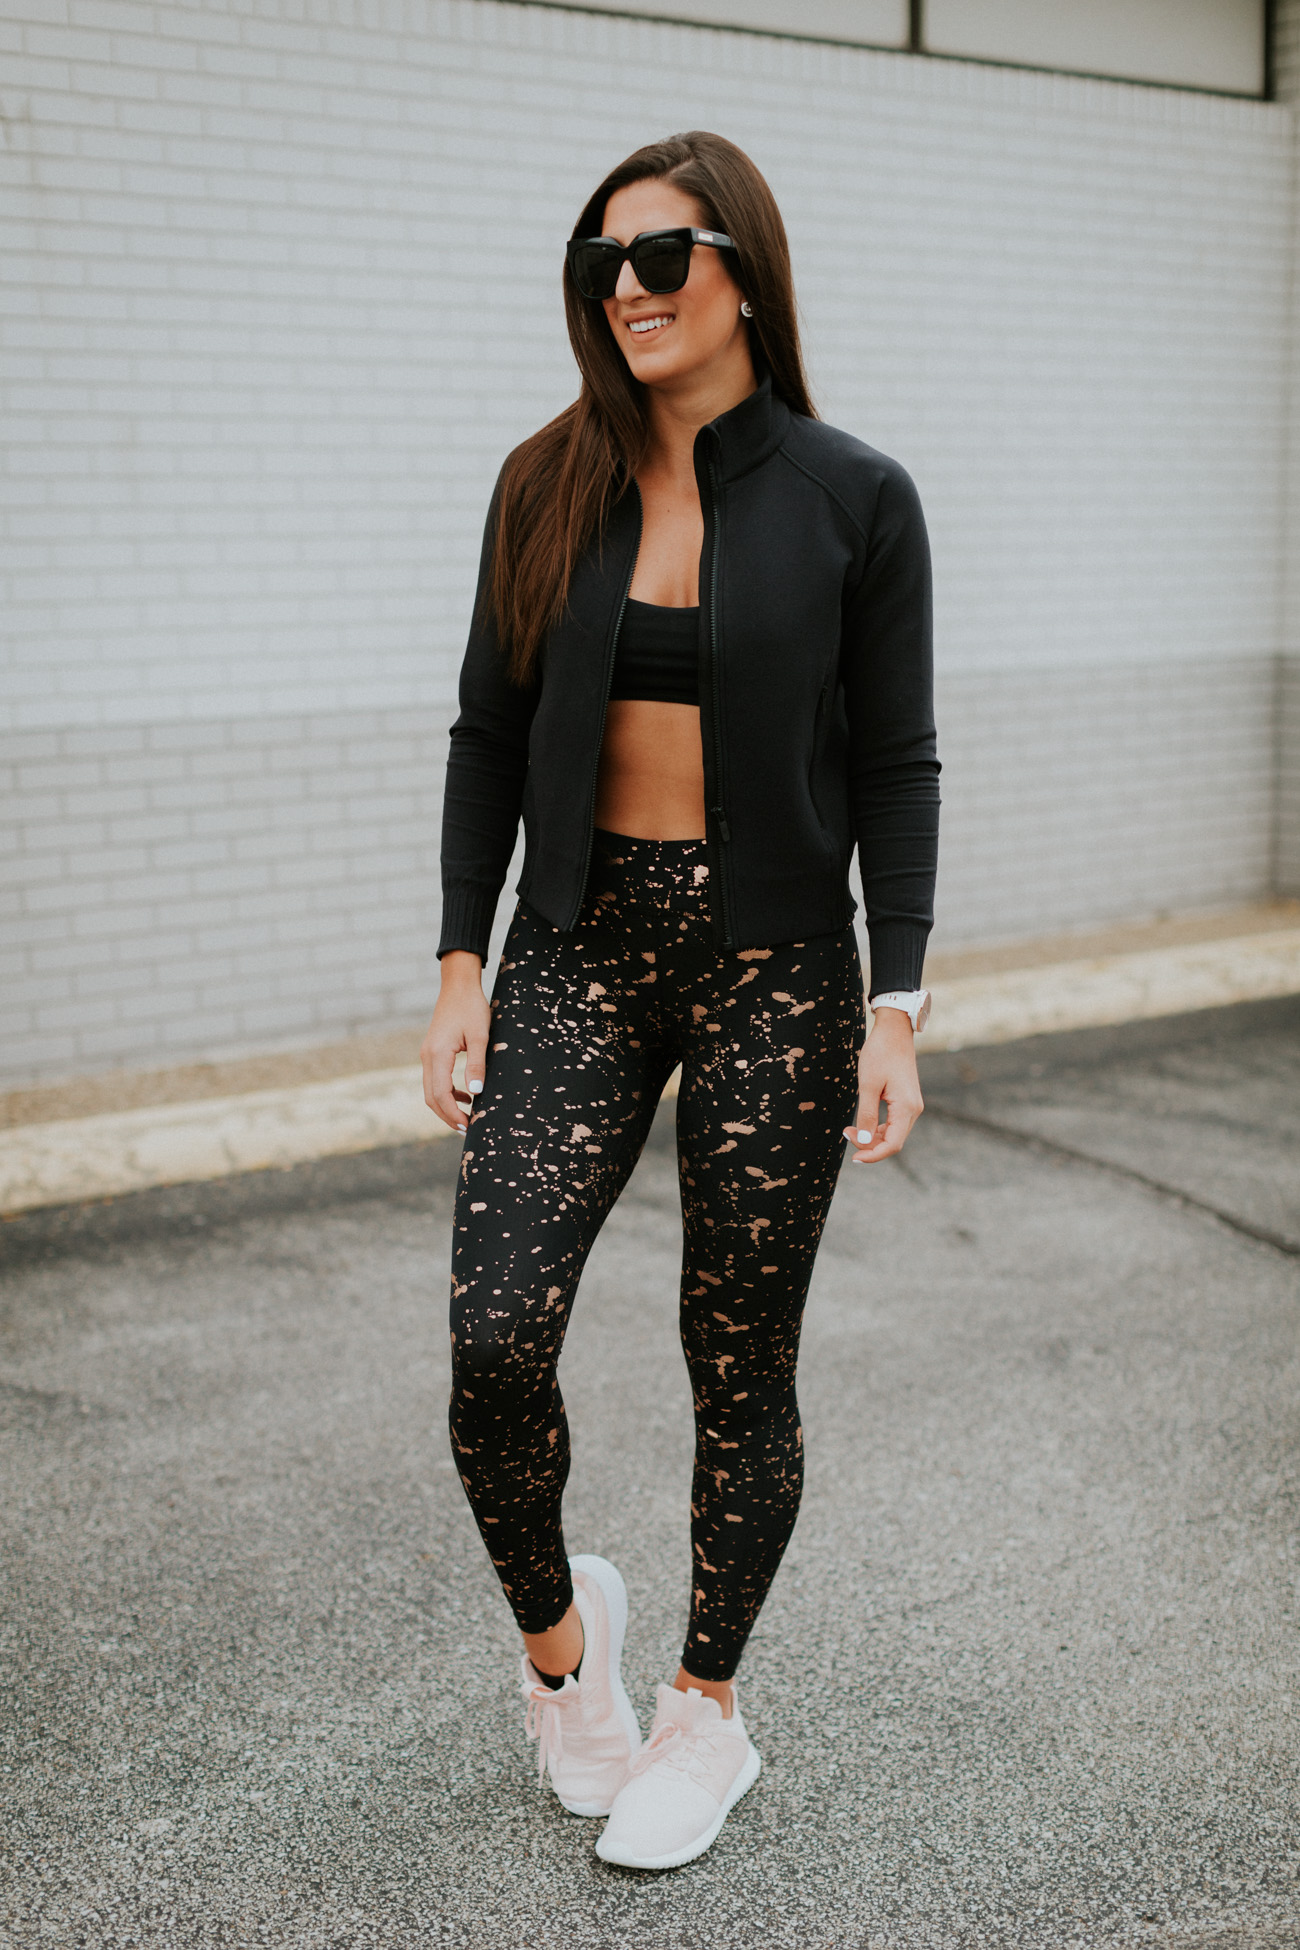 gold splatter leggings, lululemon free to be bra, adidas tubular sneakers, alo yoga jacket, alo bomber jacket, terez leggings, adidas tubular viral sneaker, athleisure, a southern drawl workouts, fall activewear, winter activewear, fit with asd videos, #fitwithasd, gym looks, trendy workout outfit, cute activewear outfit, a southern drawl workouts, weekly workout routine, weekly workouts, weekly exercises, polar a360 watch, cute activewear, cute workout outfit, running routine, girl gains, fitness inspiration, fitspo, nike athleisure outfit // grace wainwright a southern drawl